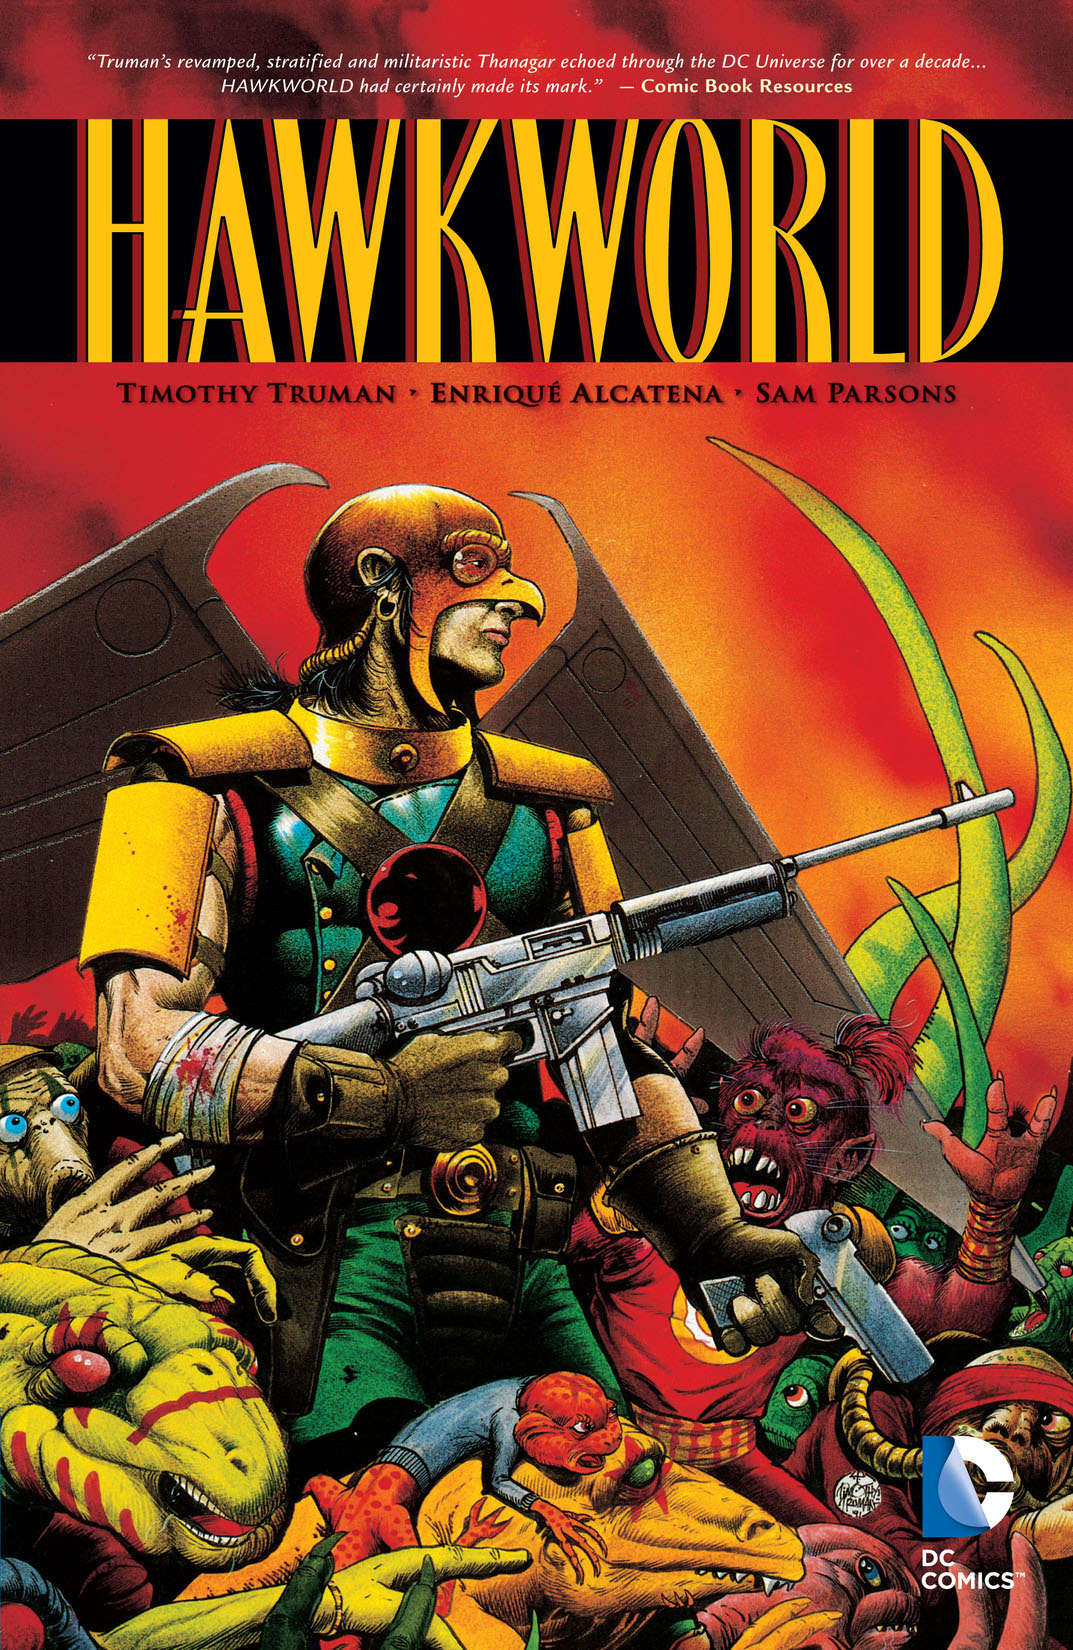 Hawkworld (New Edition) preview images